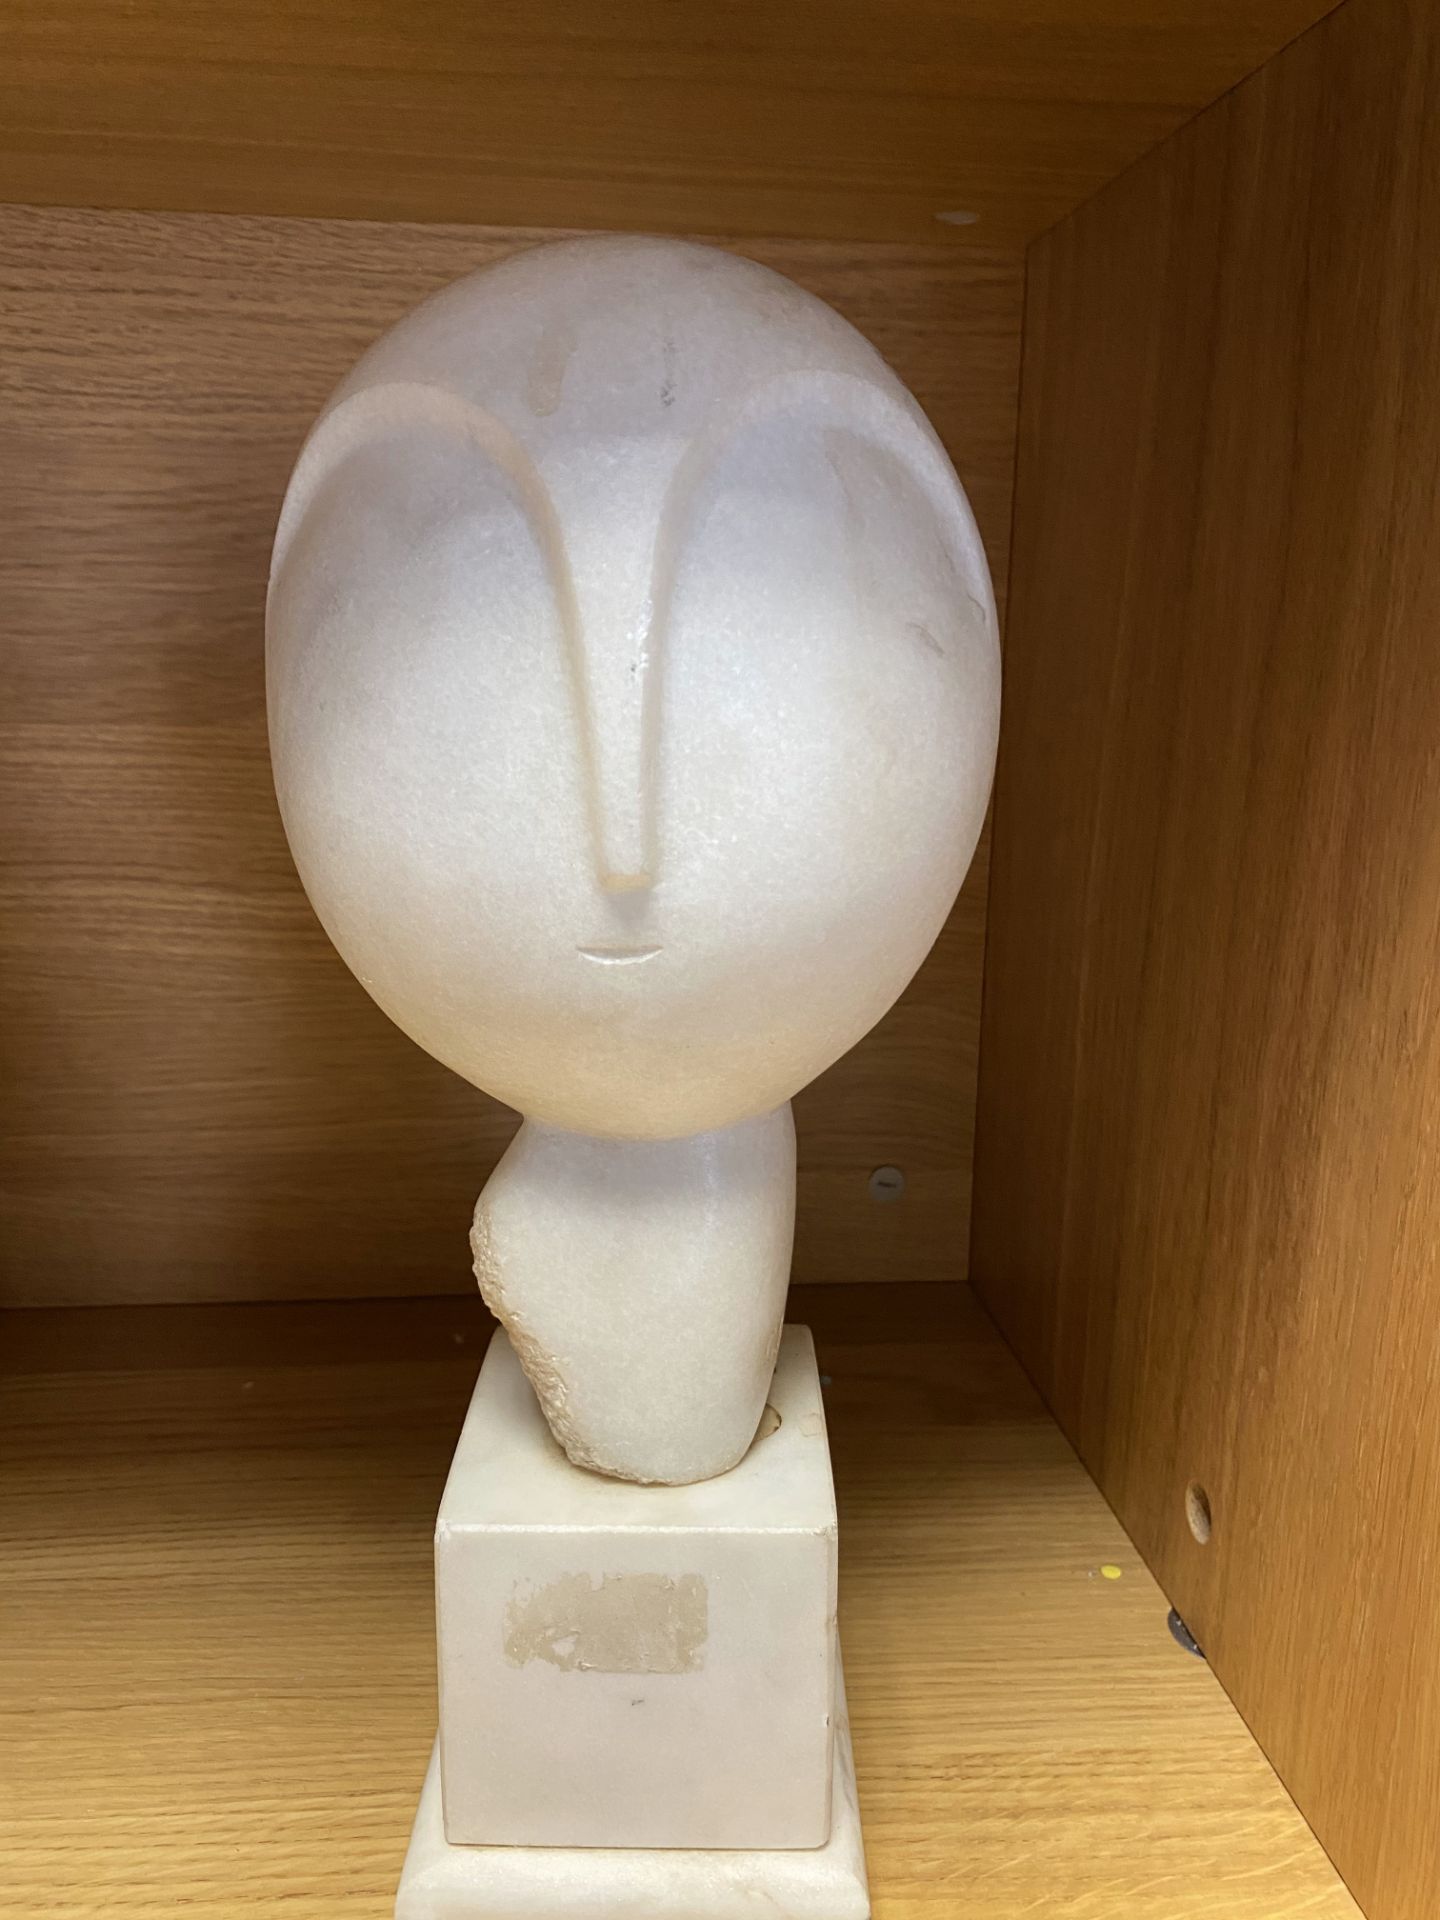 Constantin Brancusi (1876/1957) Marble Head Art Sculpture Signed and Dated 1939 - Image 7 of 18